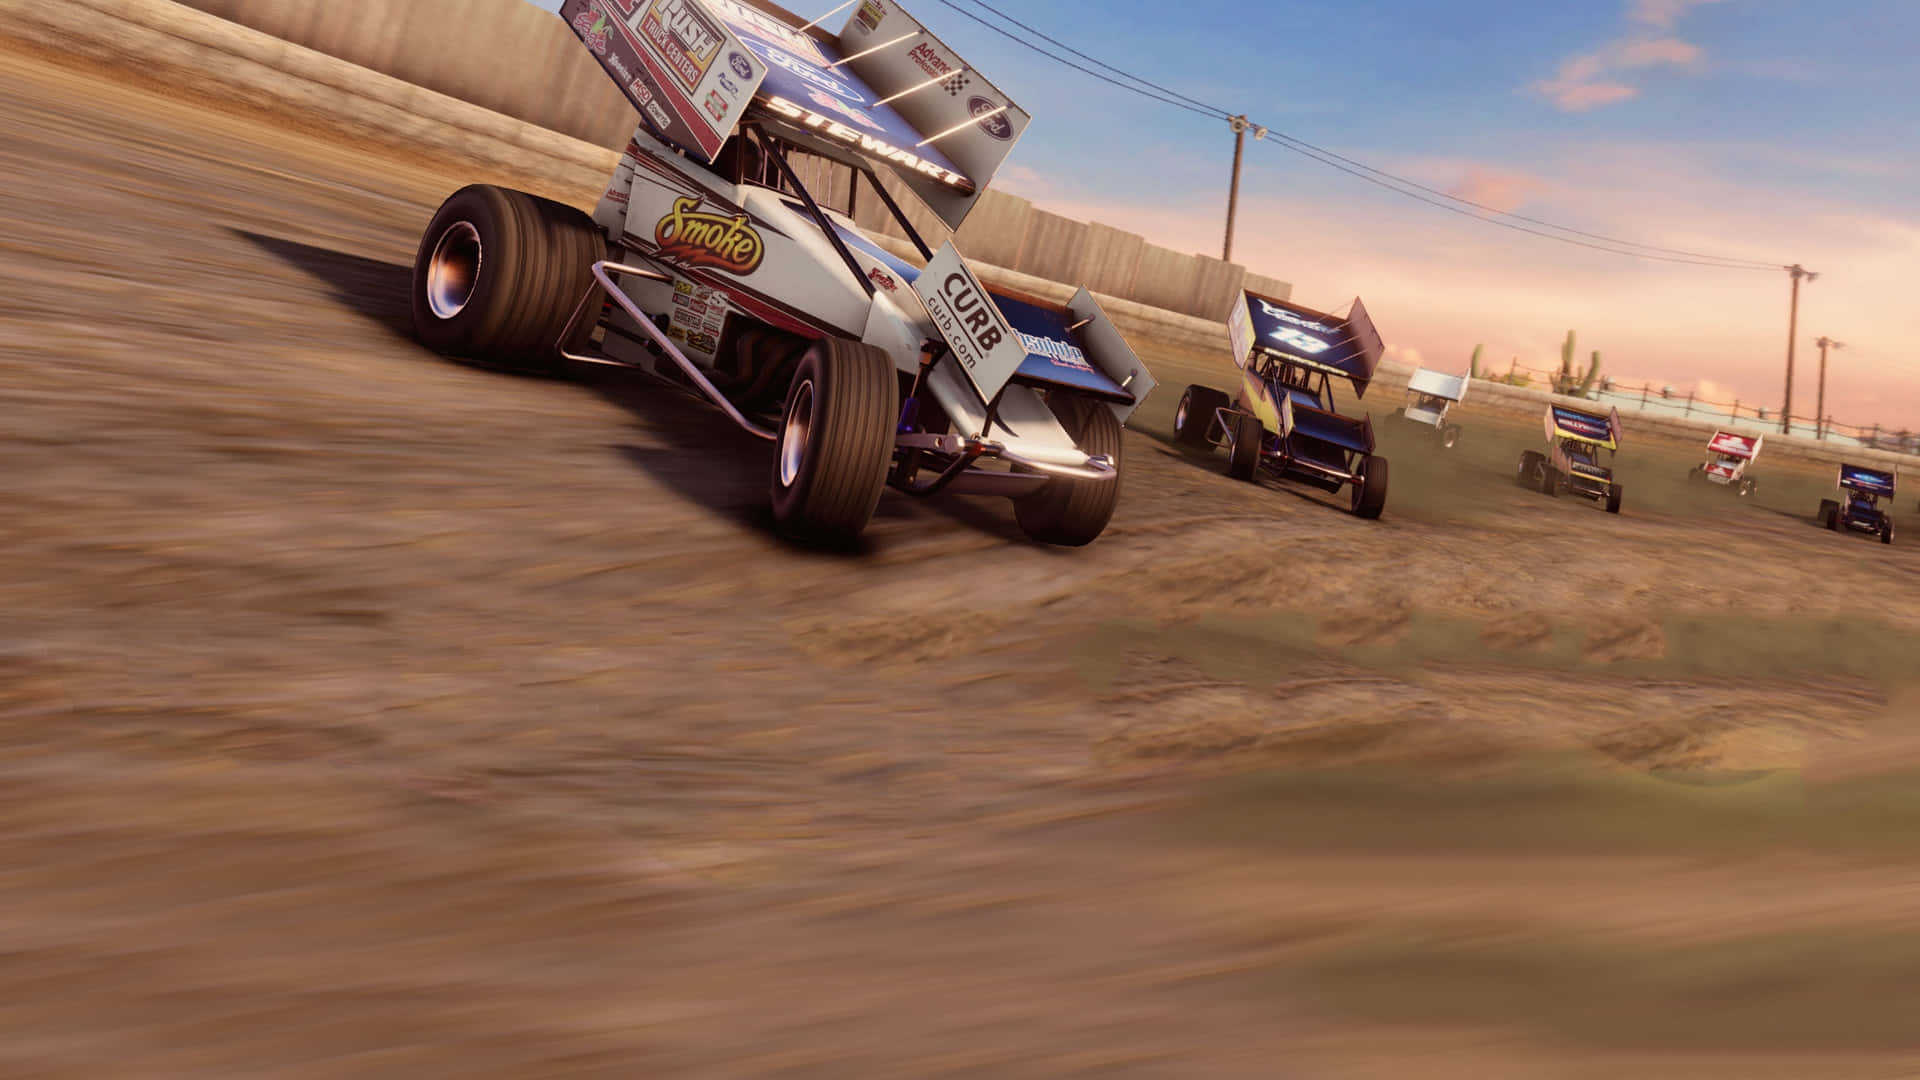 A Dirt Track With Several Cars Racing In The Background Wallpaper